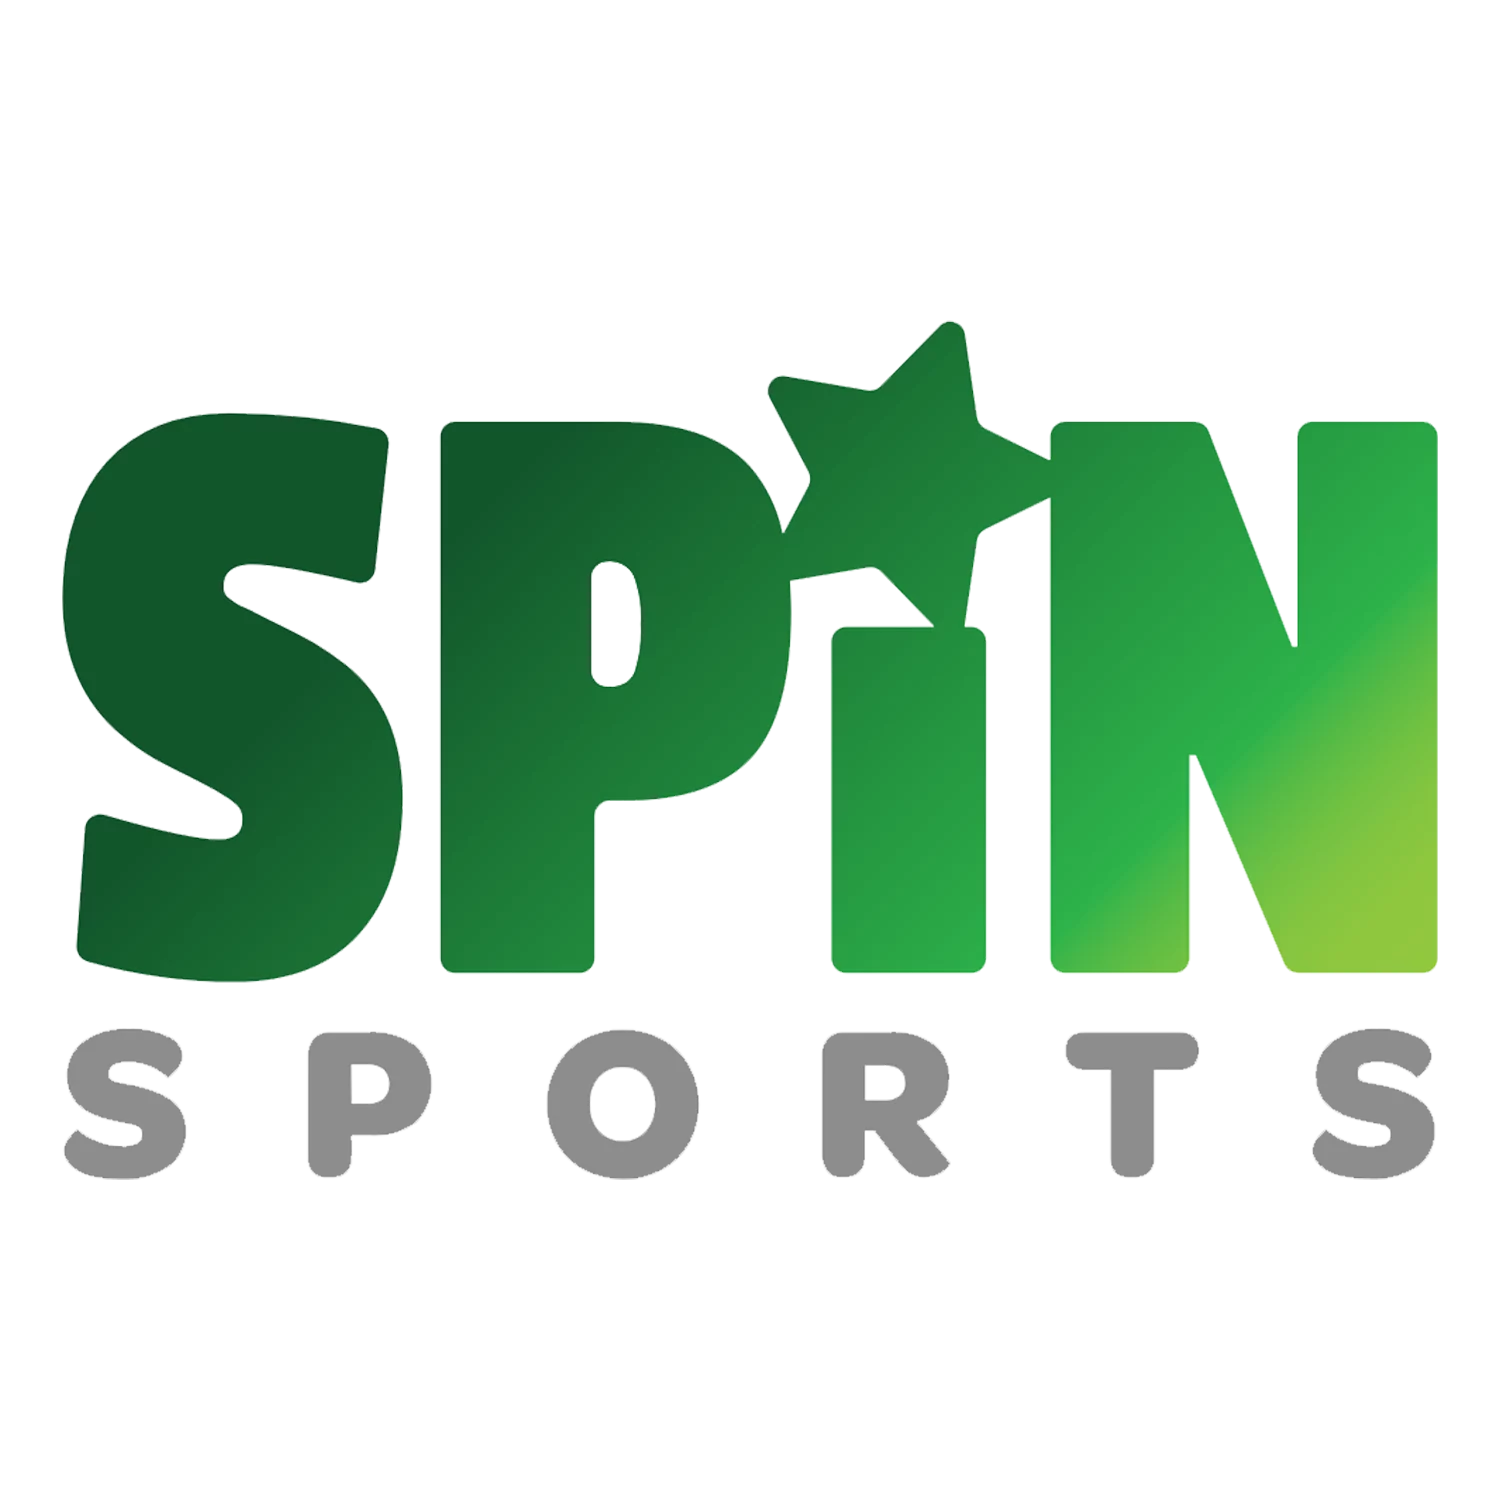 Learn more about betting on Spin Sports.